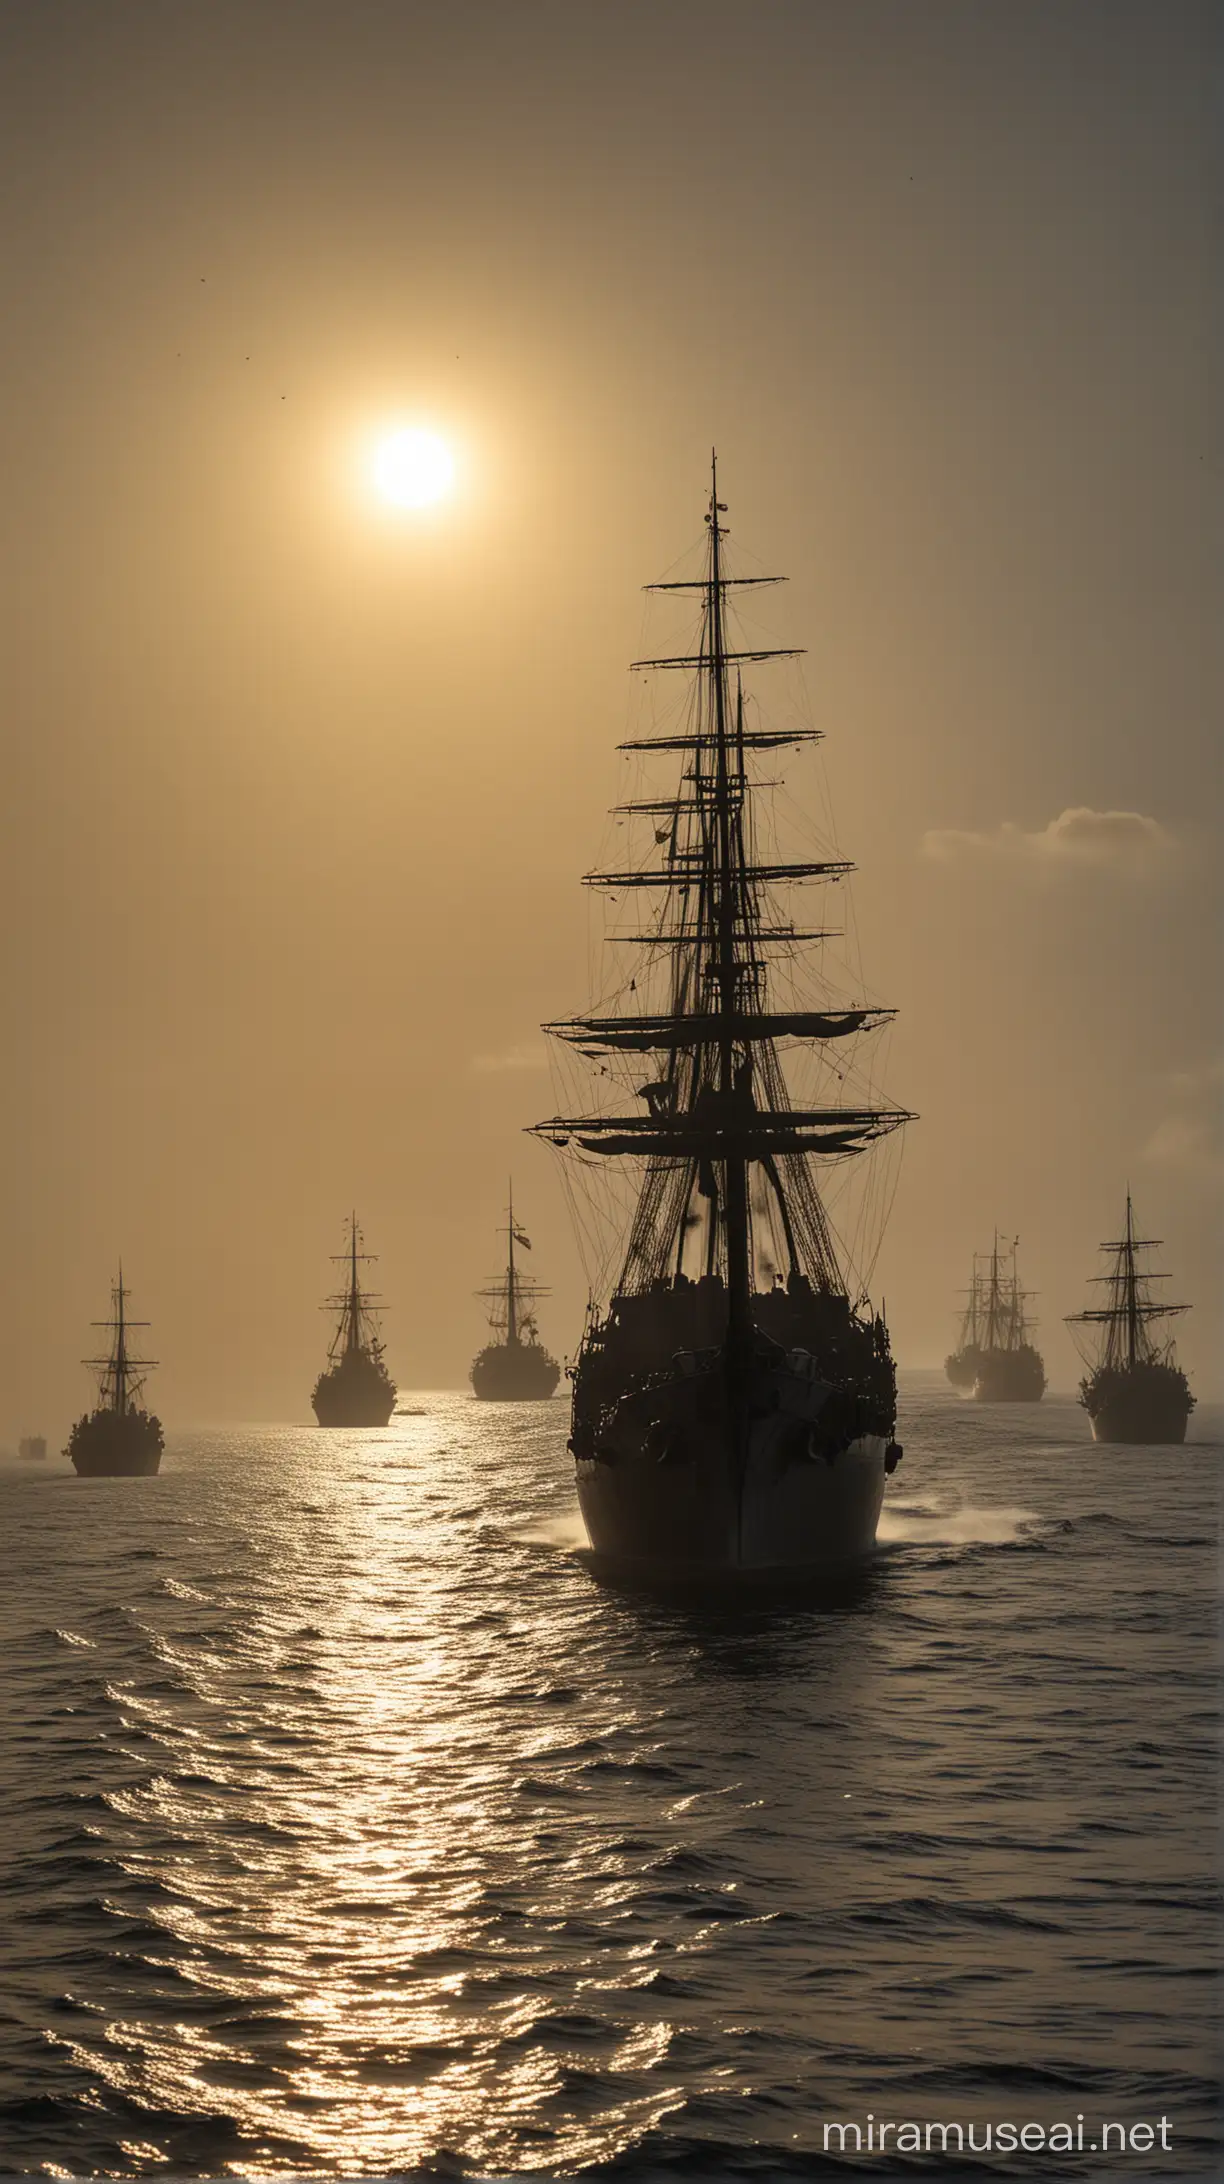 The British warships approach Zanzibar's harbor, creating an ominous cloud of mist in the sky. The silhouettes of the ships become dramatically distinct with the setting sun. The surface of the sea sparkles with reflections of the ships, signaling the impending conflict.

